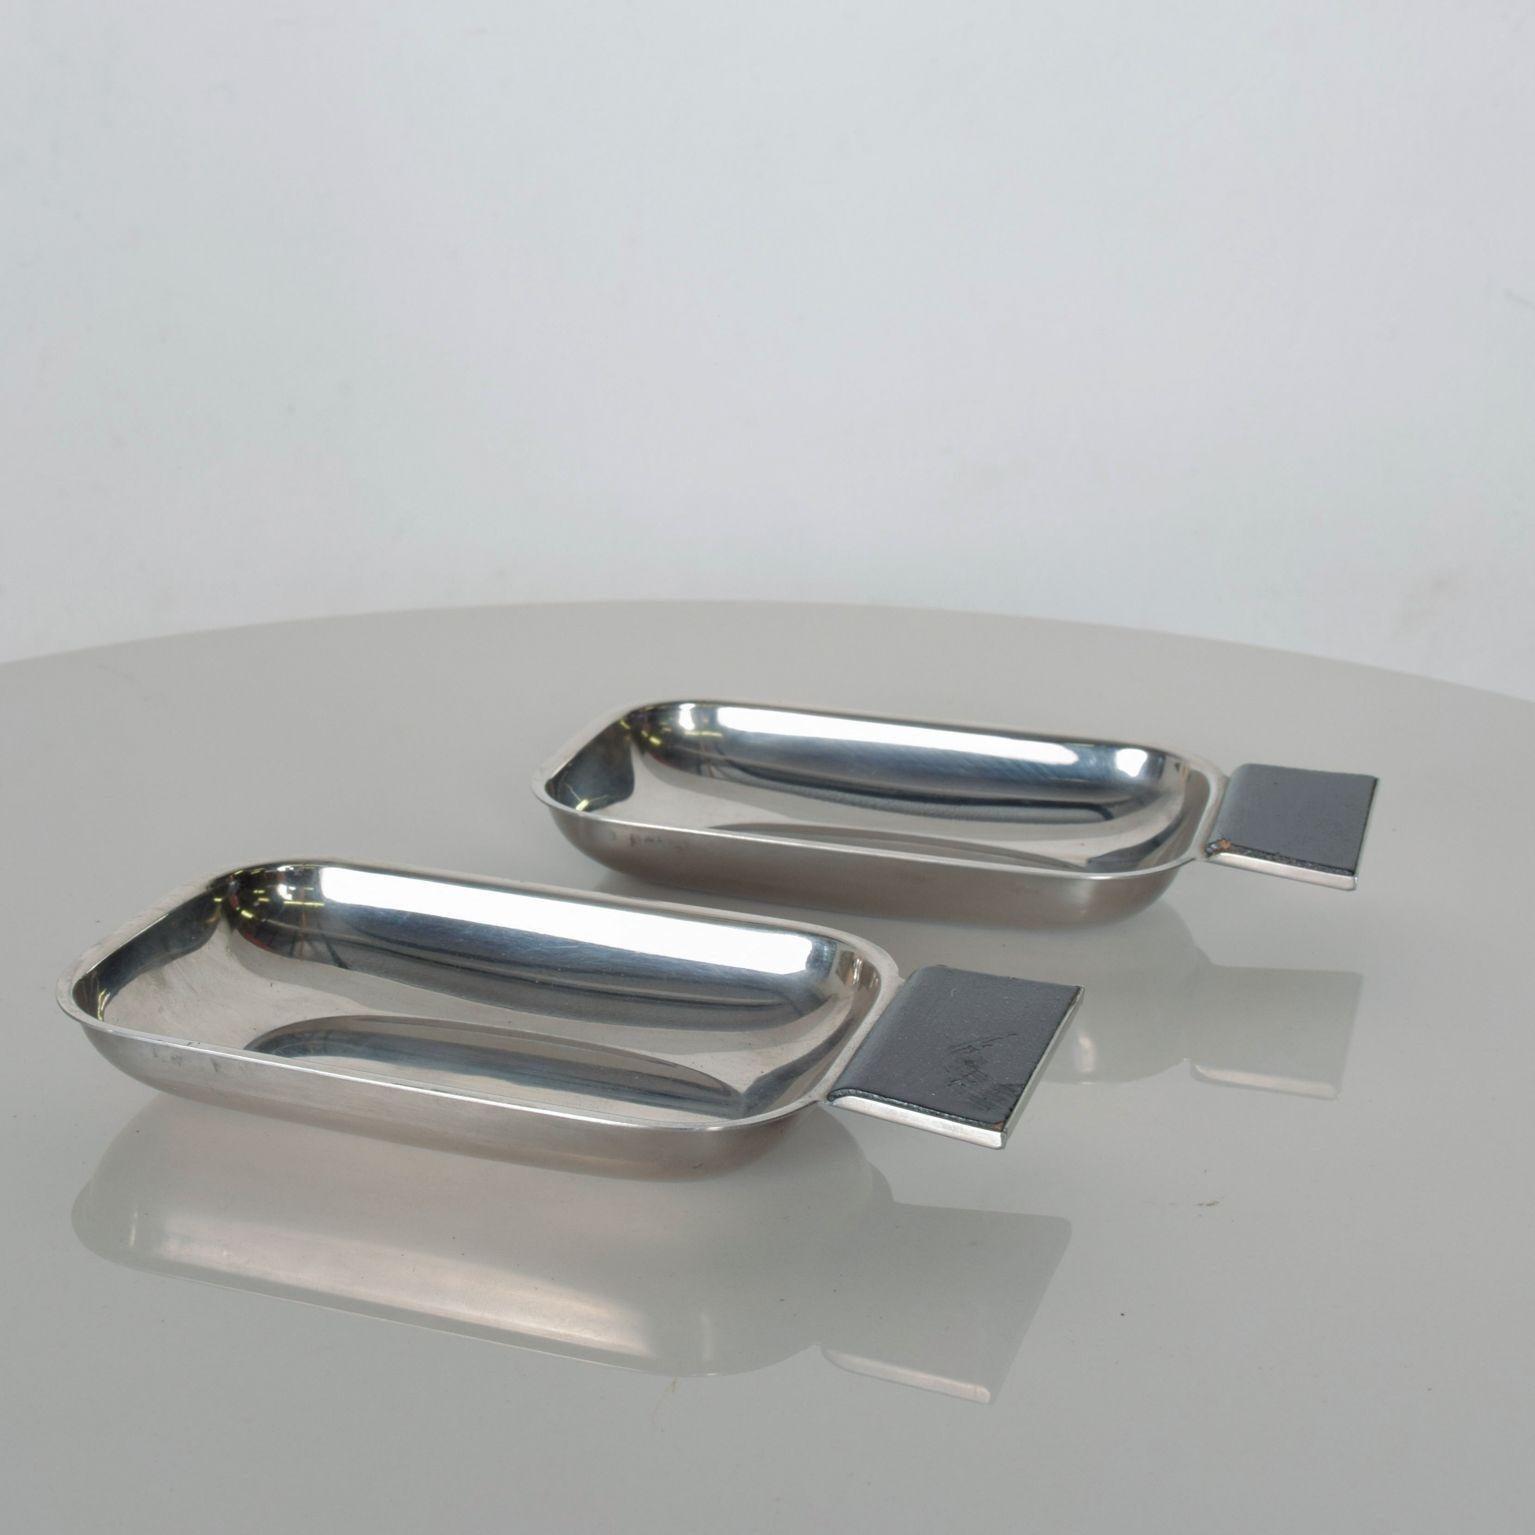 Mid-Century Modern 1960s Two Petite Stainless Steel Serving Trays Handled Side Tray made ITALY